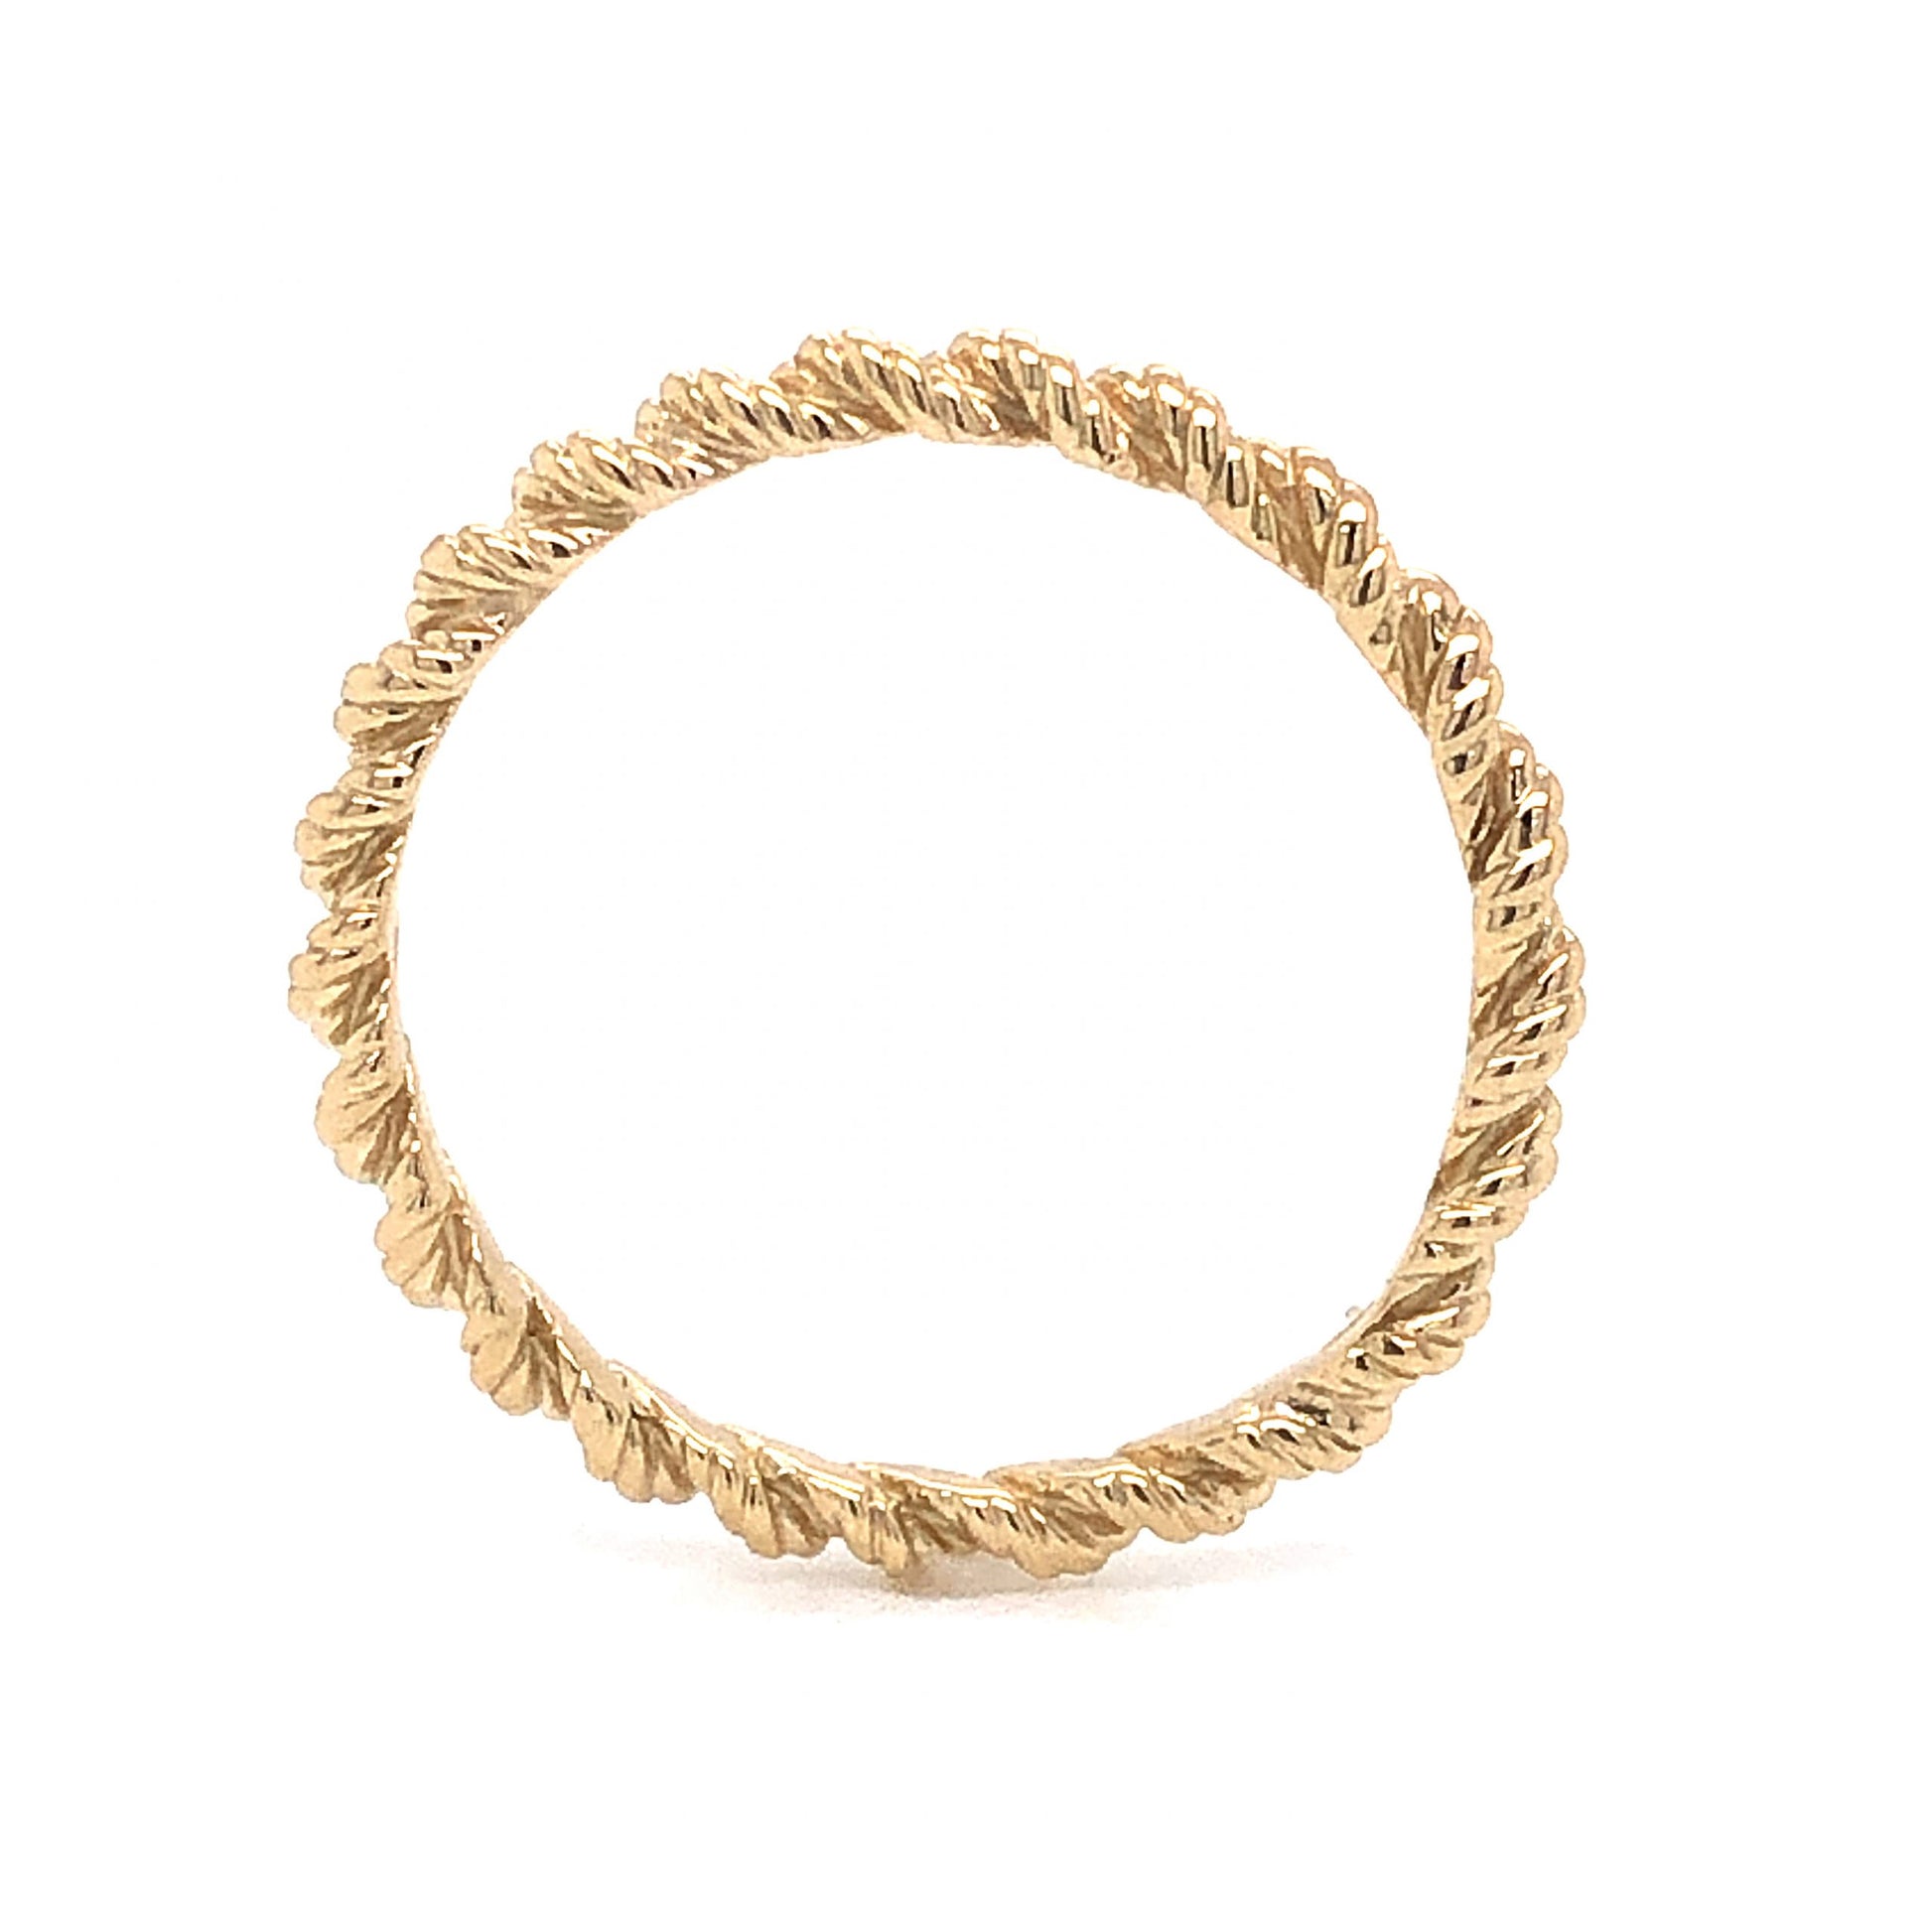 Textured Rope Stacking Band in 14k Yellow Gold